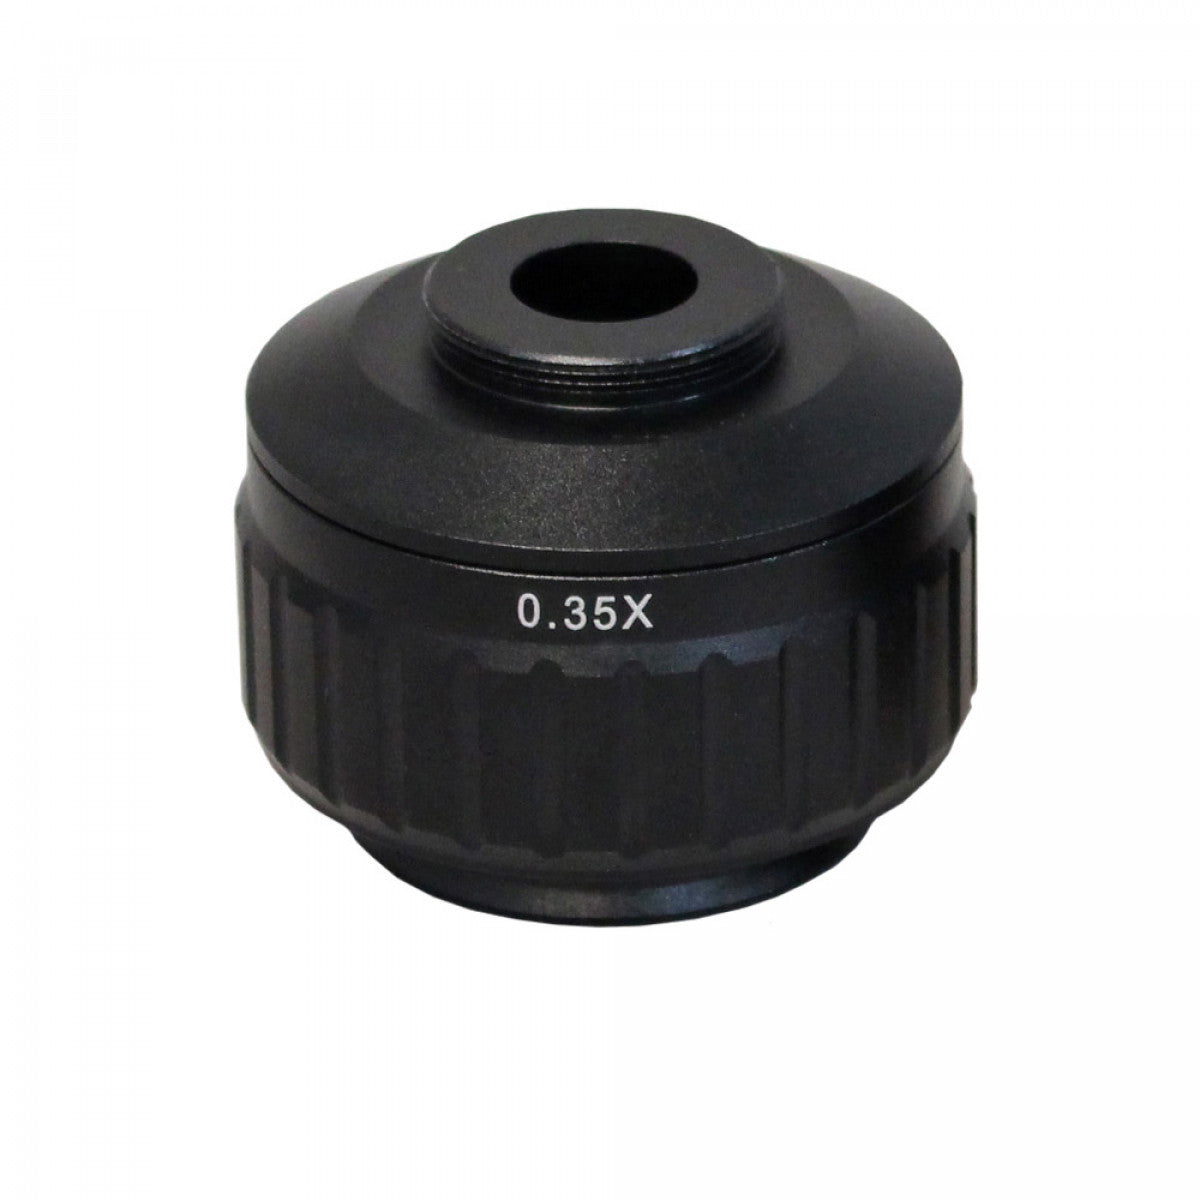 .C-Mount Adapers For Accu-Scope 3000-LED